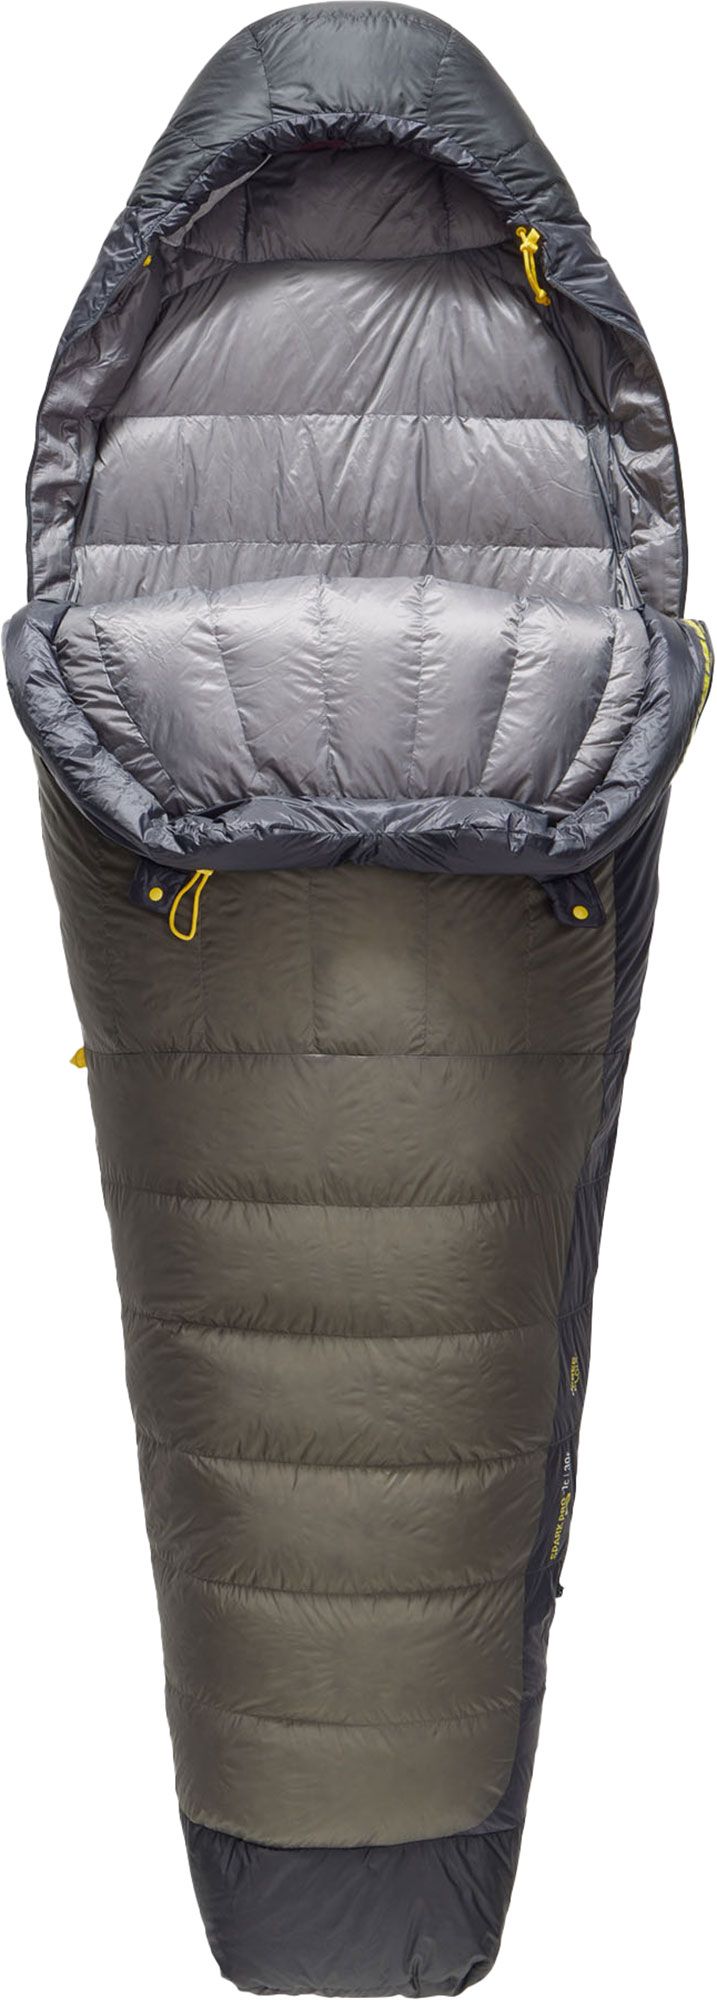 Photos - Suitcase / Backpack Cover Sea To Summit Spark Pro Down 30F Sleeping Bag, Men's, Regular, Beluga 23S2 